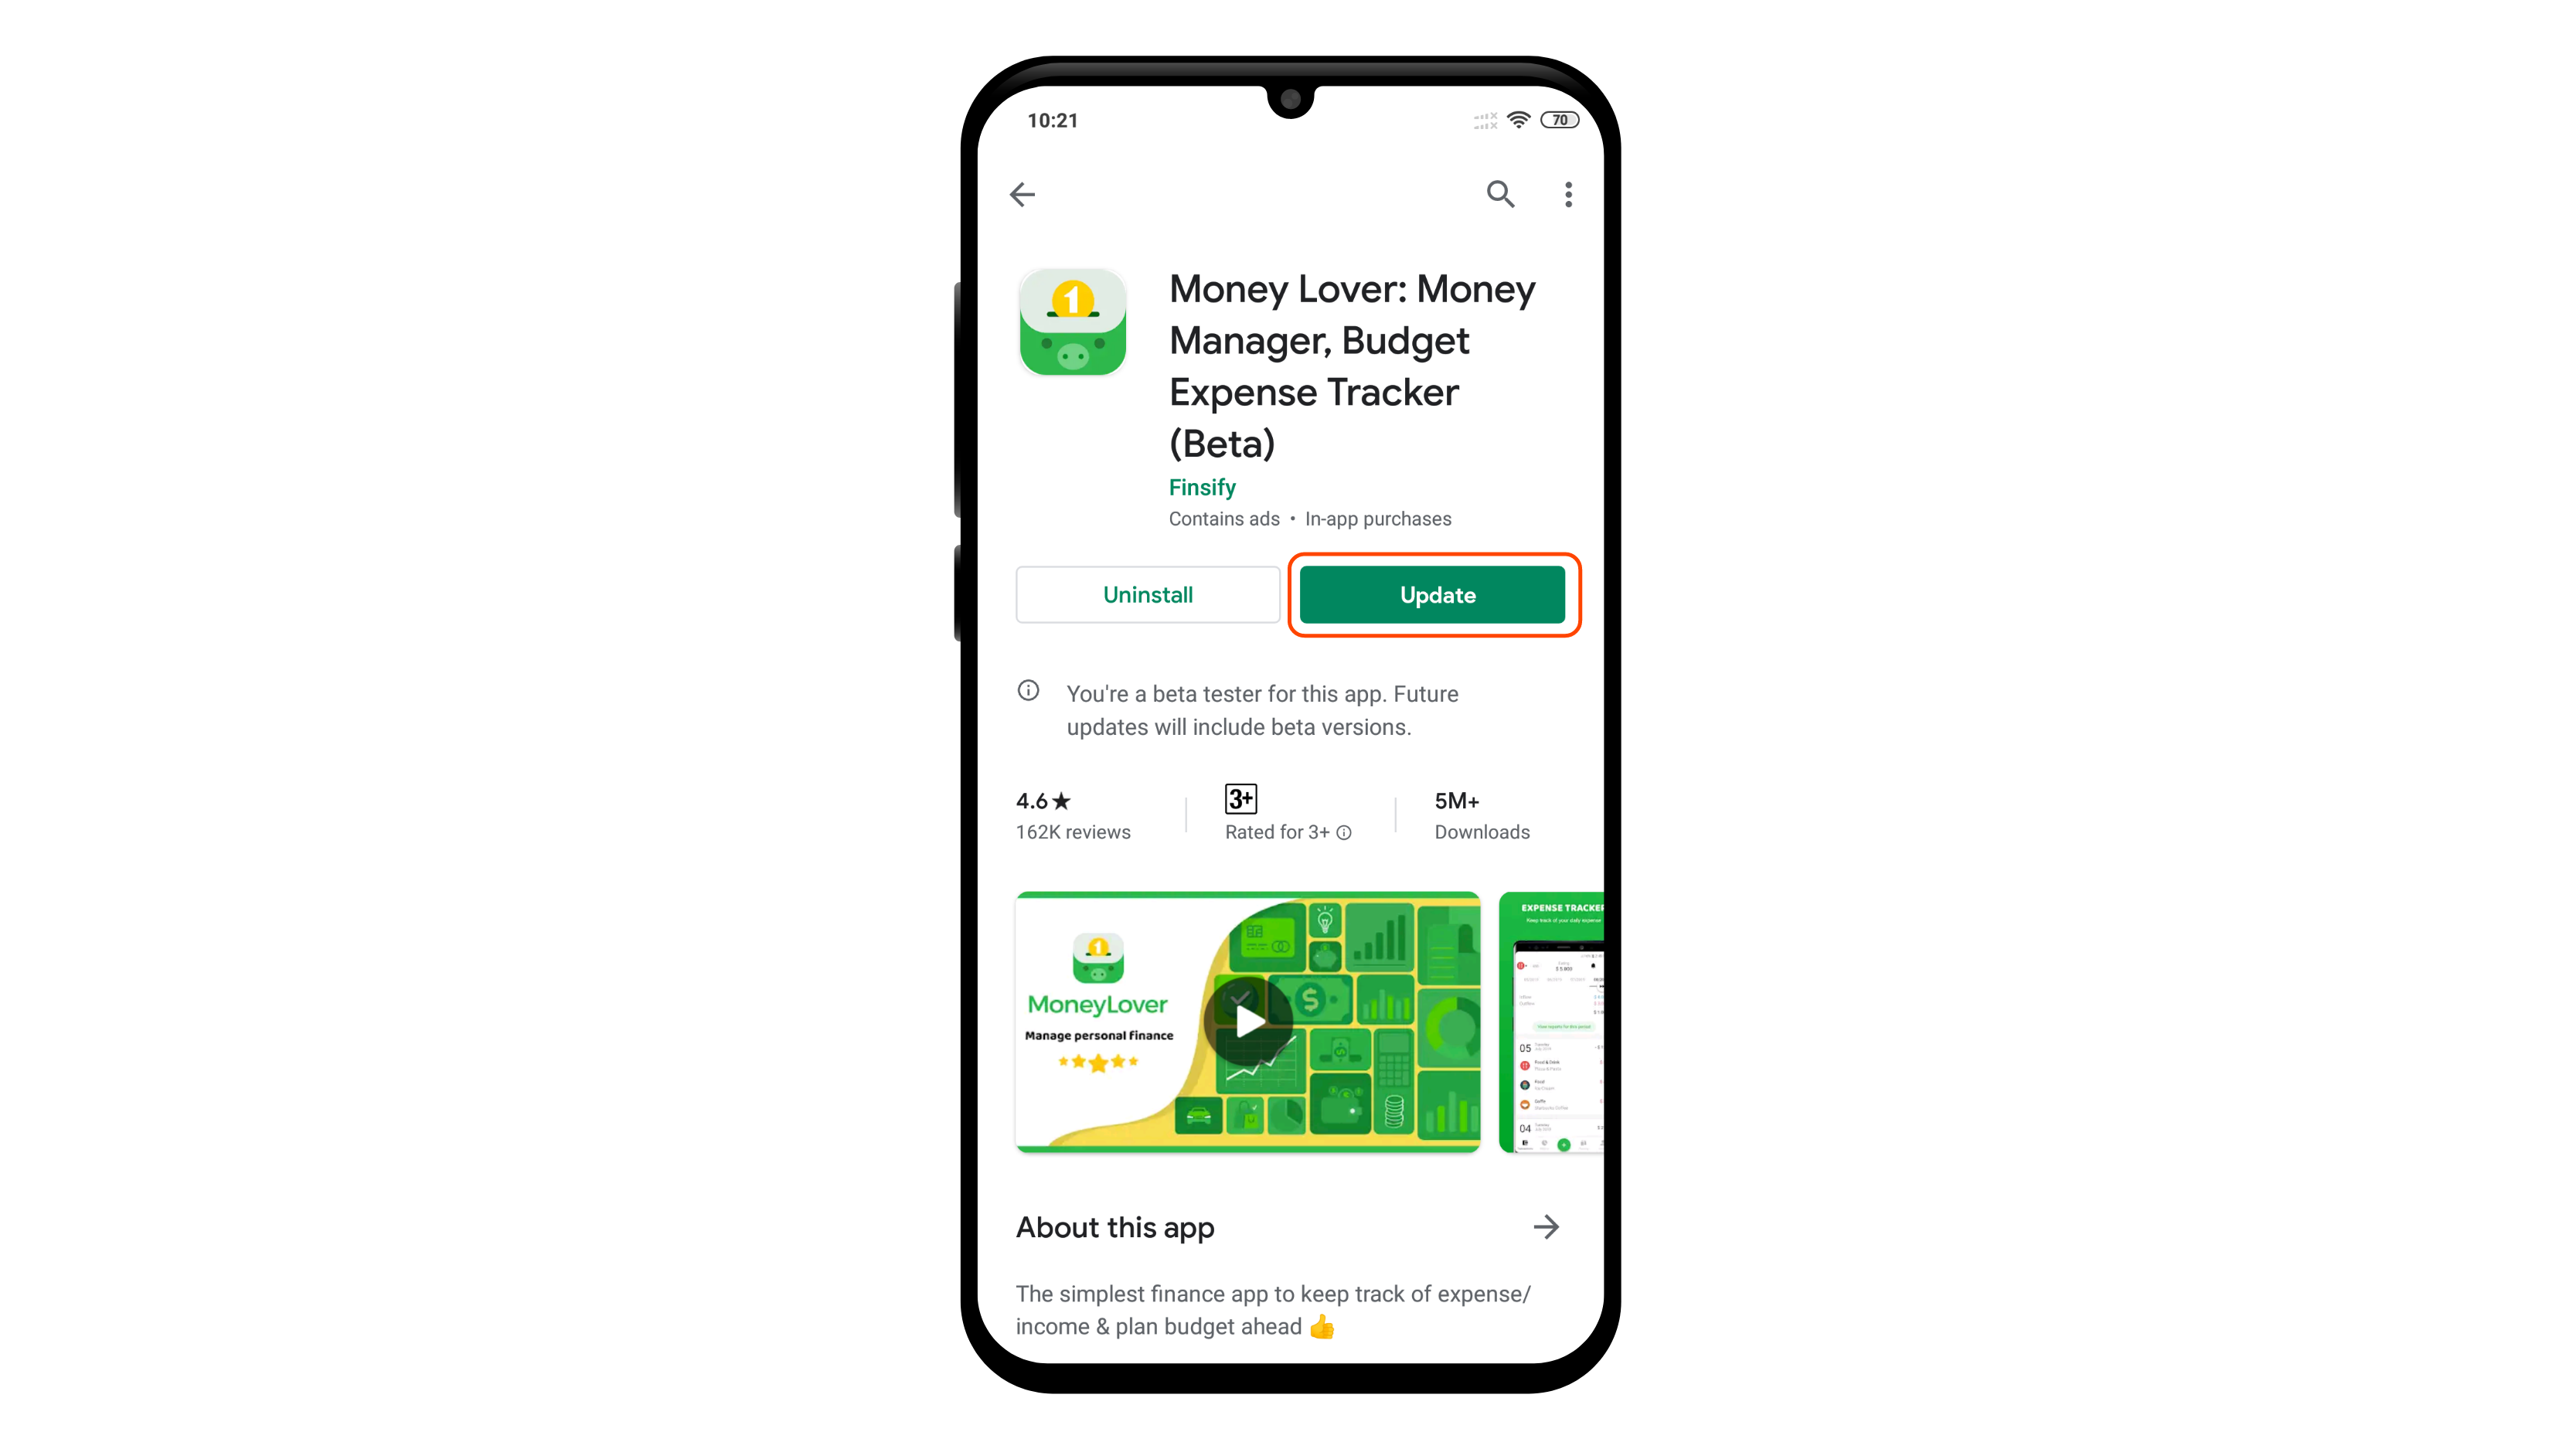 Money Lover on Android